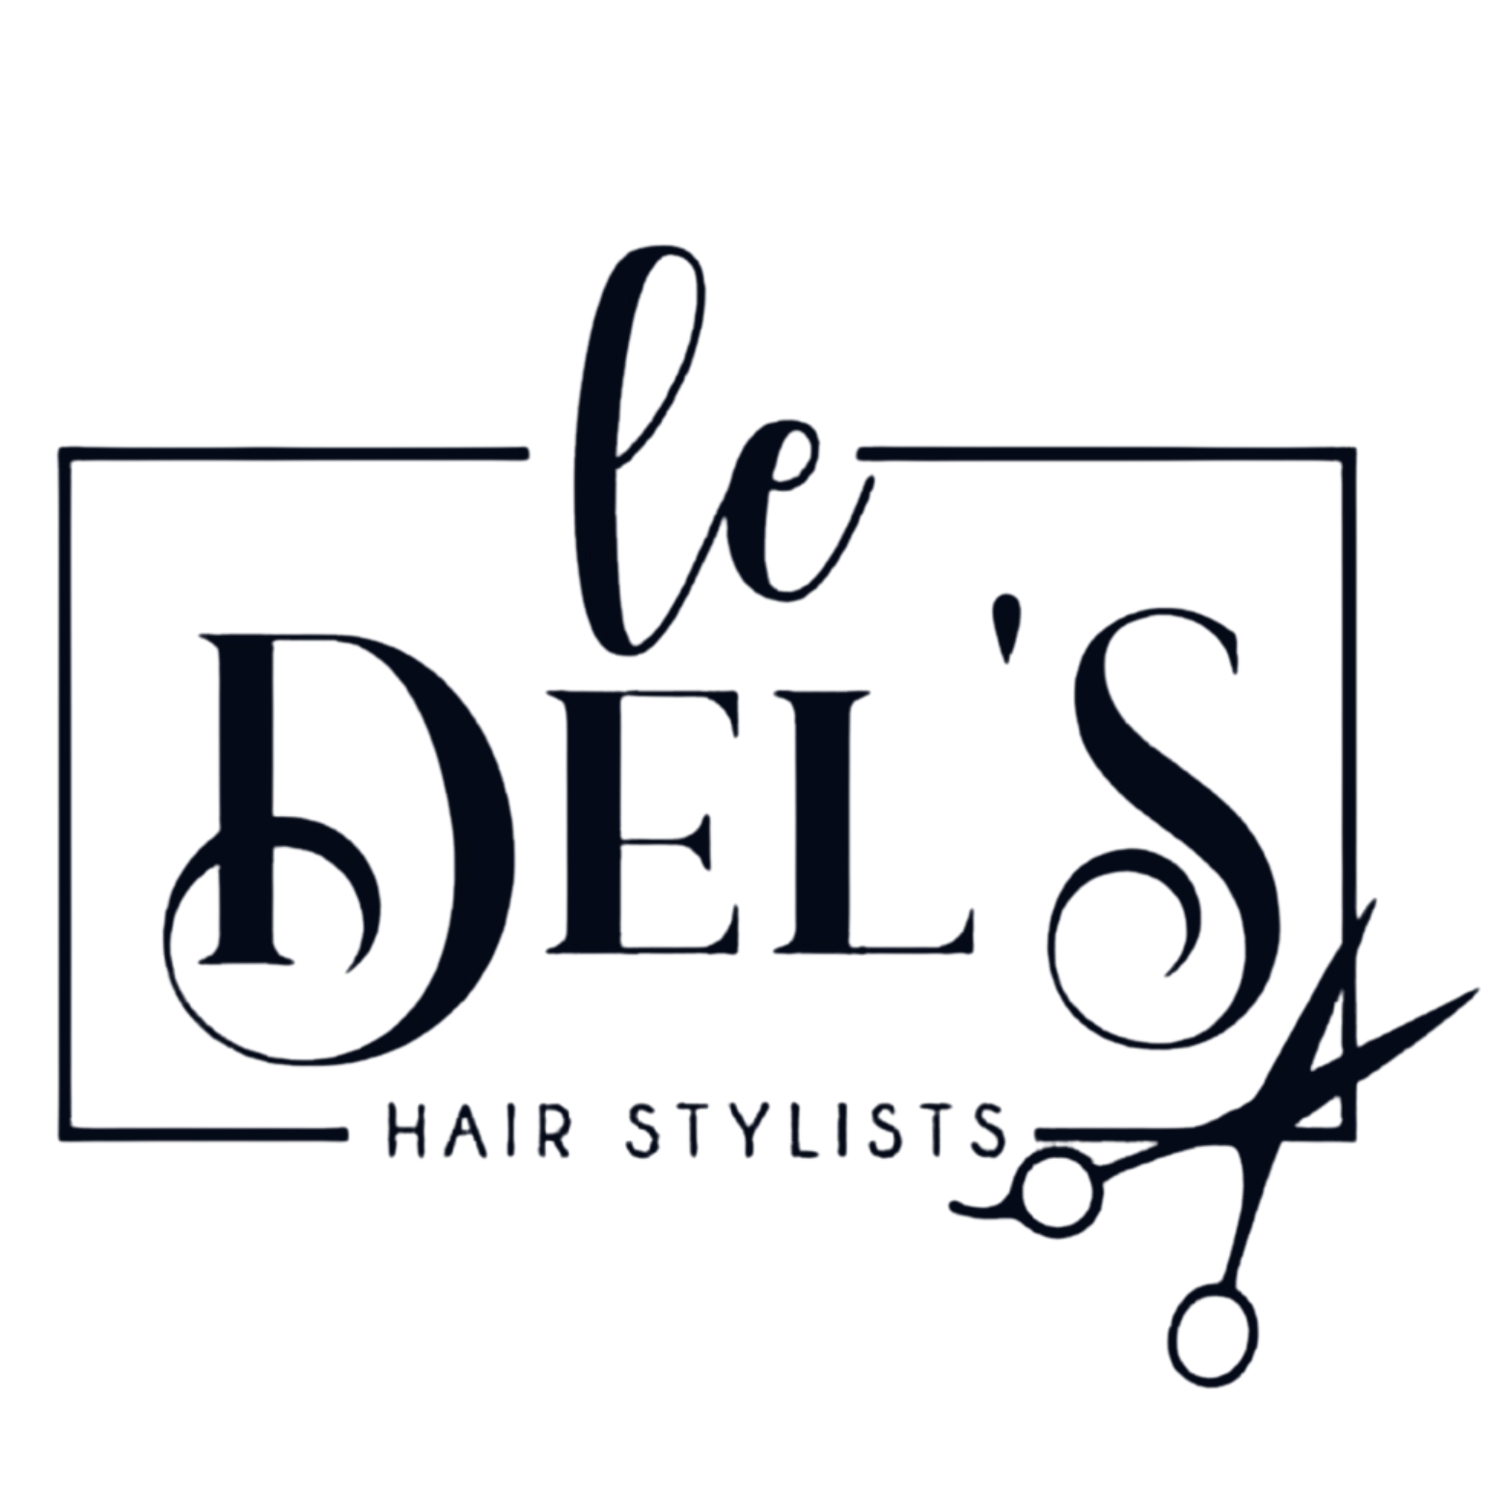 Le-Del's Hairstylists Home